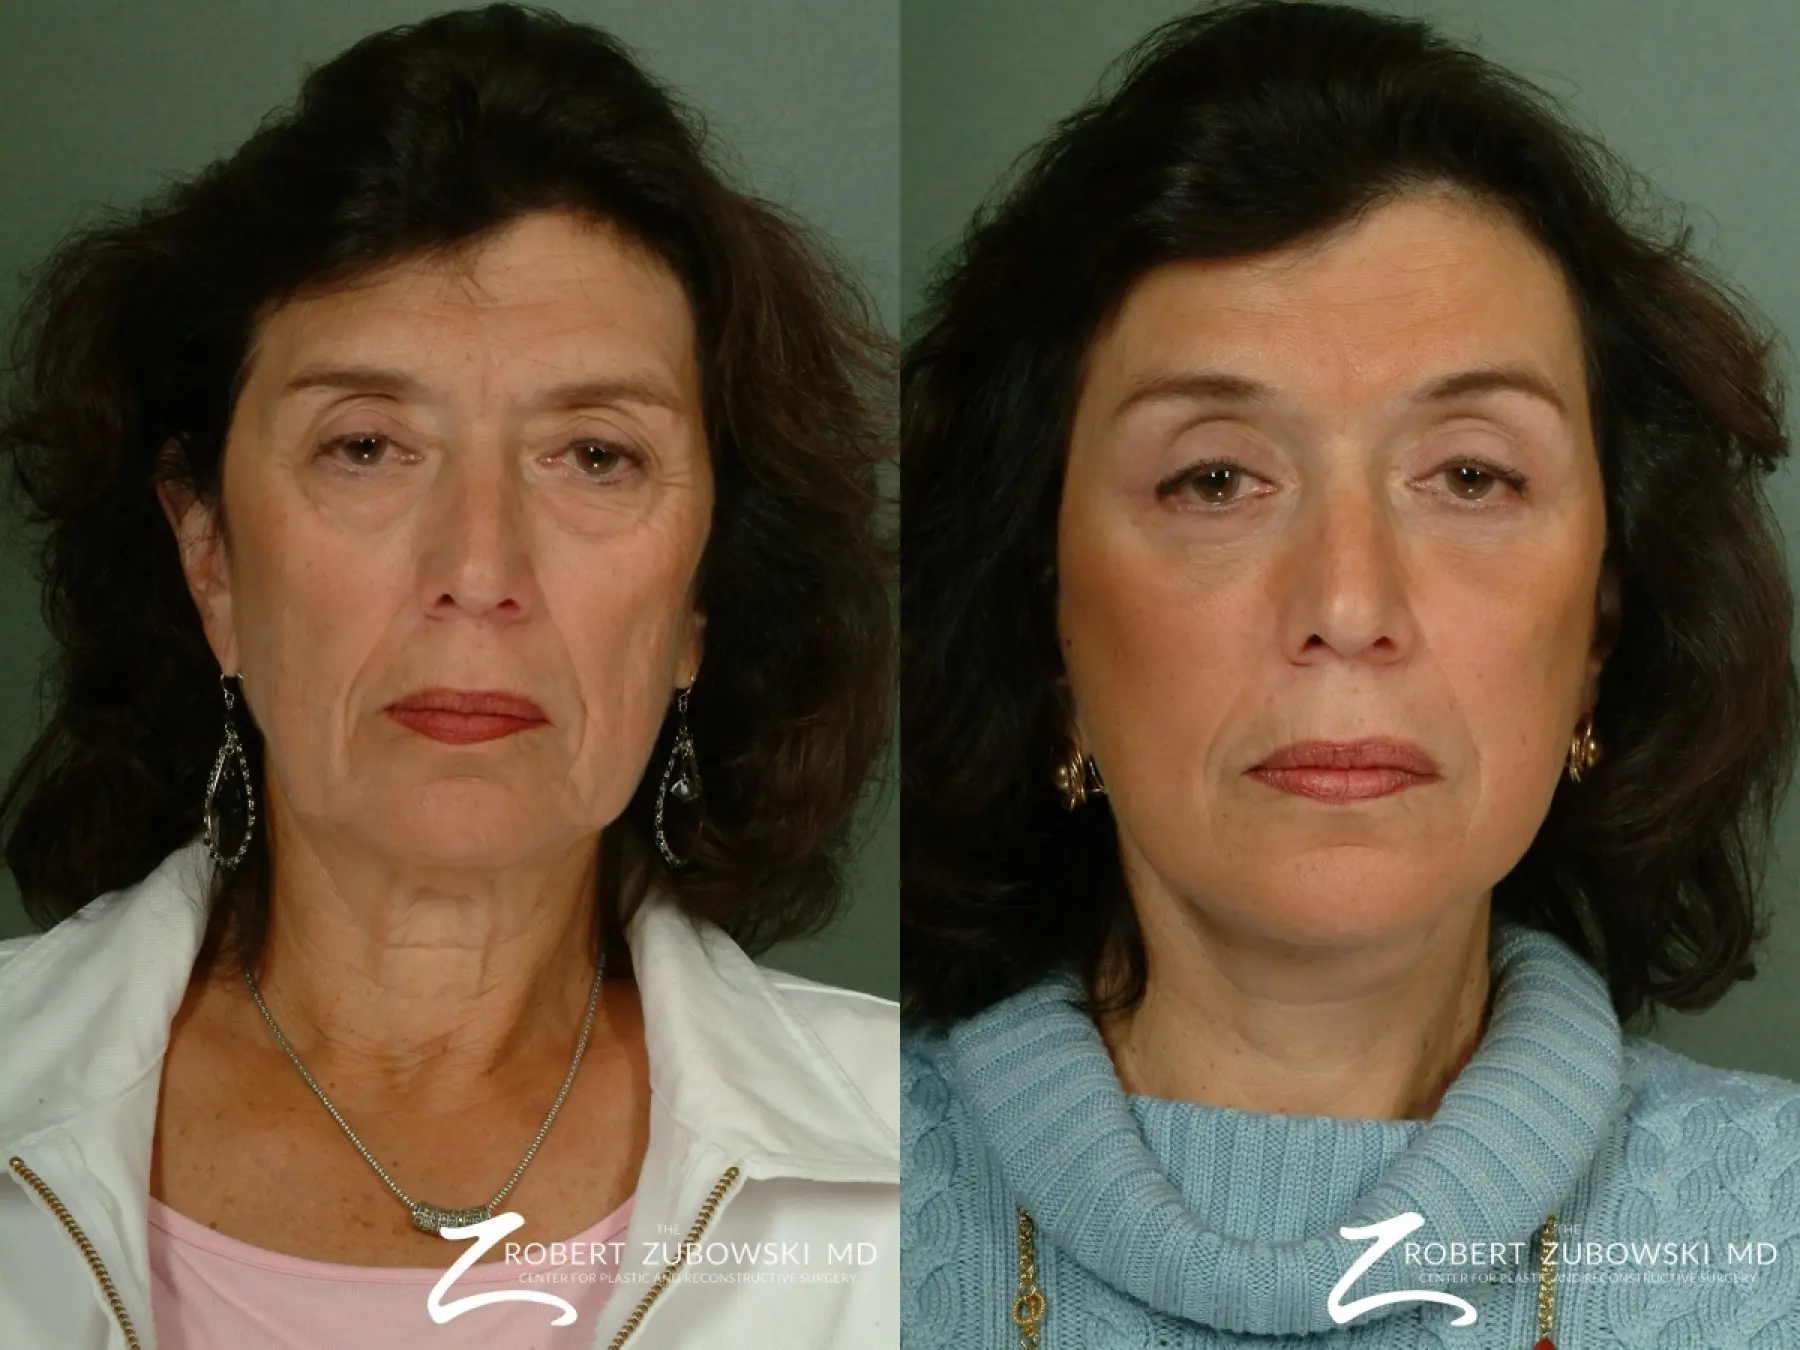 Brow Lift: Patient 5 - Before and After  